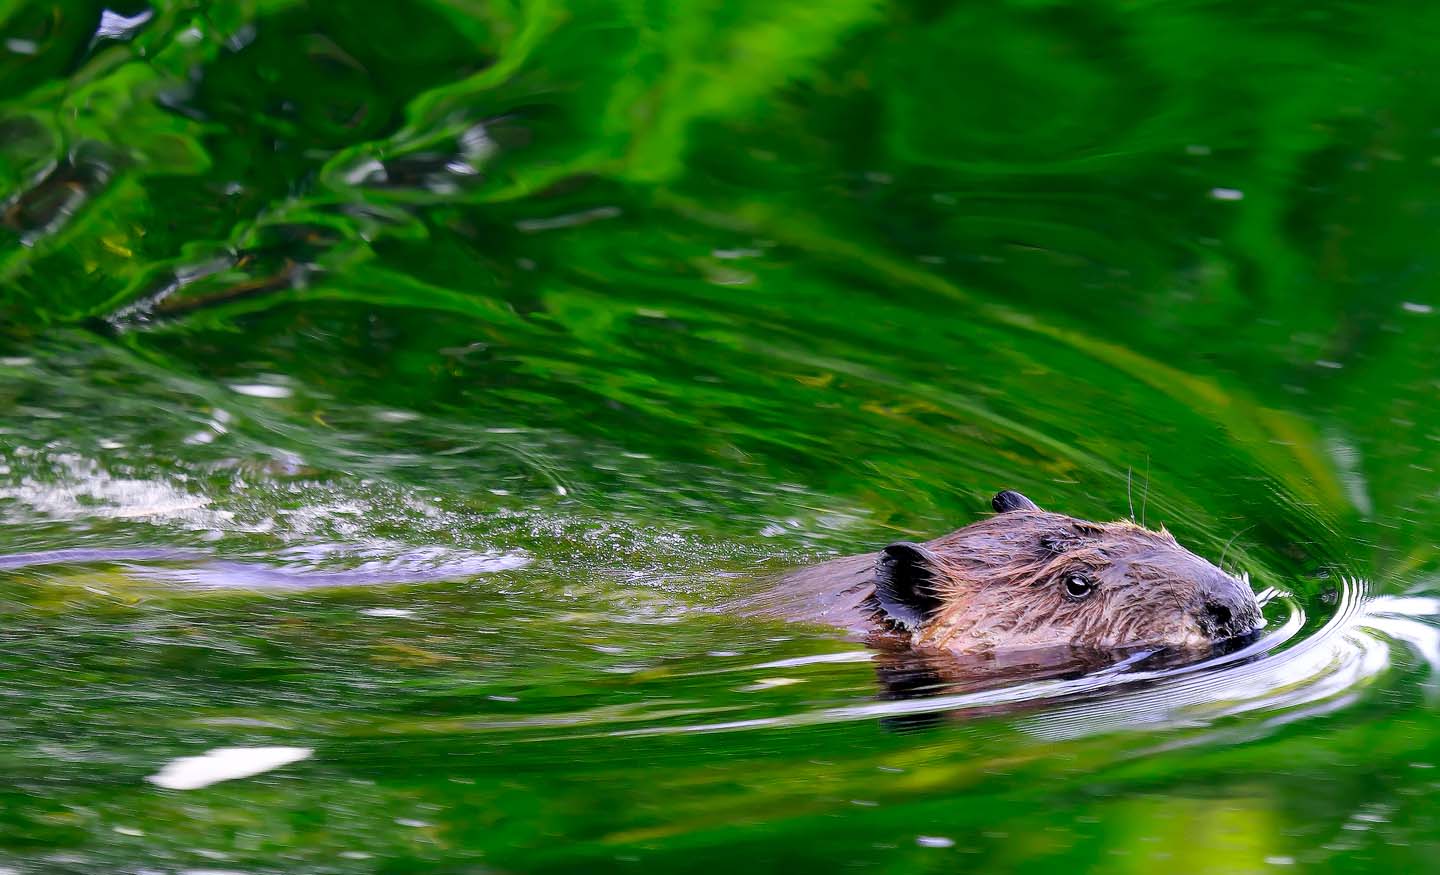 A beaver swimming in water reflecting green